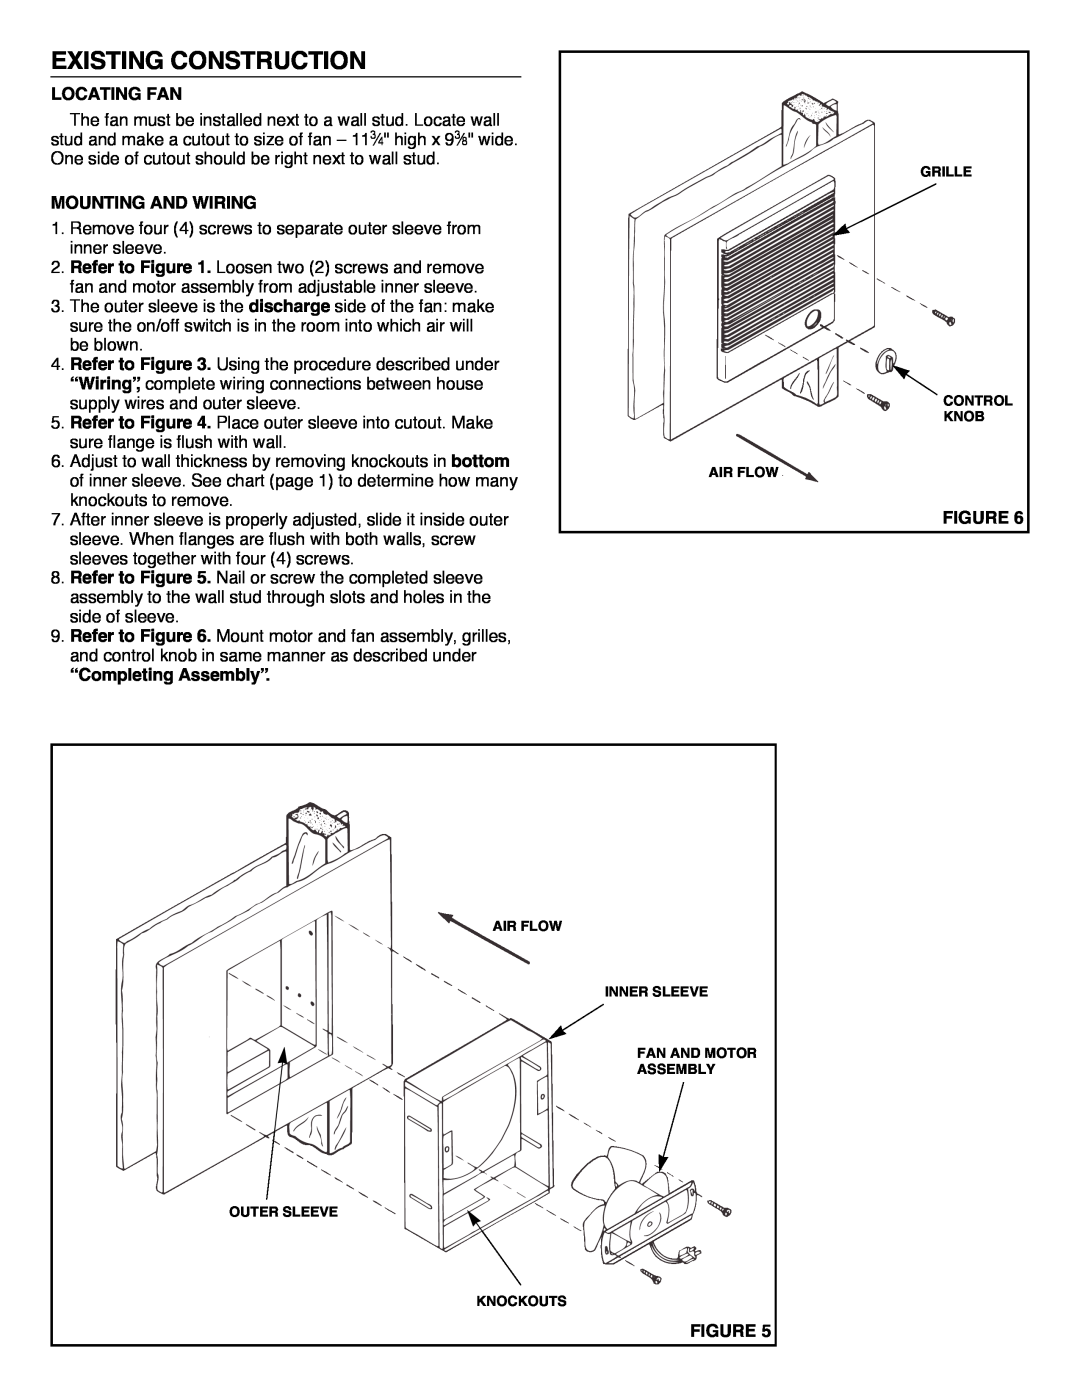 NuTone 8145 installation instructions Existing Construction, Locating Fan, Mounting And Wiring, “Completing Assembly” 